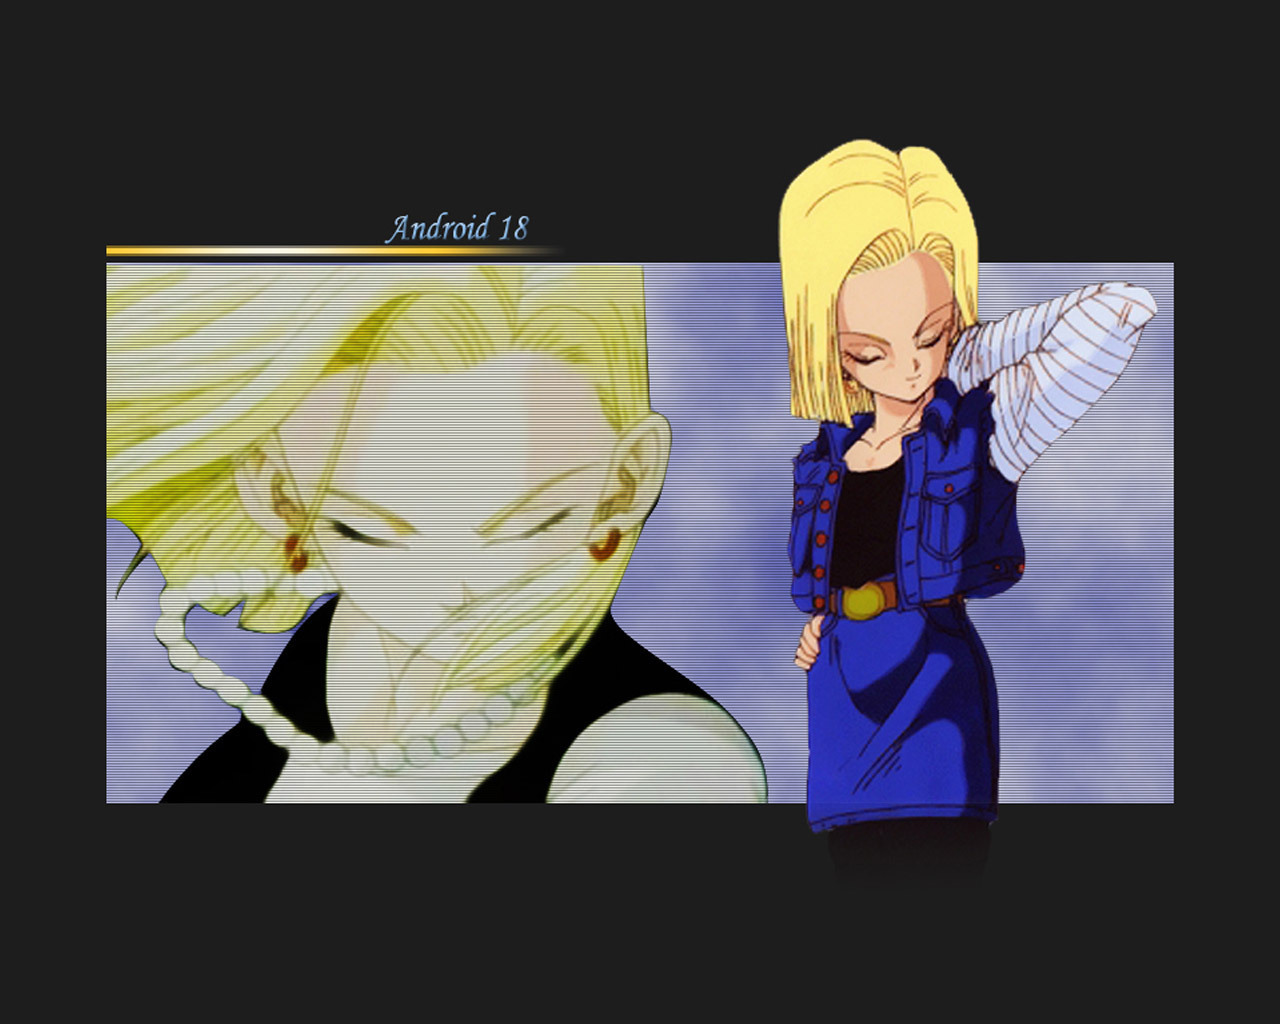 Android 18 - Dragon Ball Z Android 18 - HD Wallpaper 